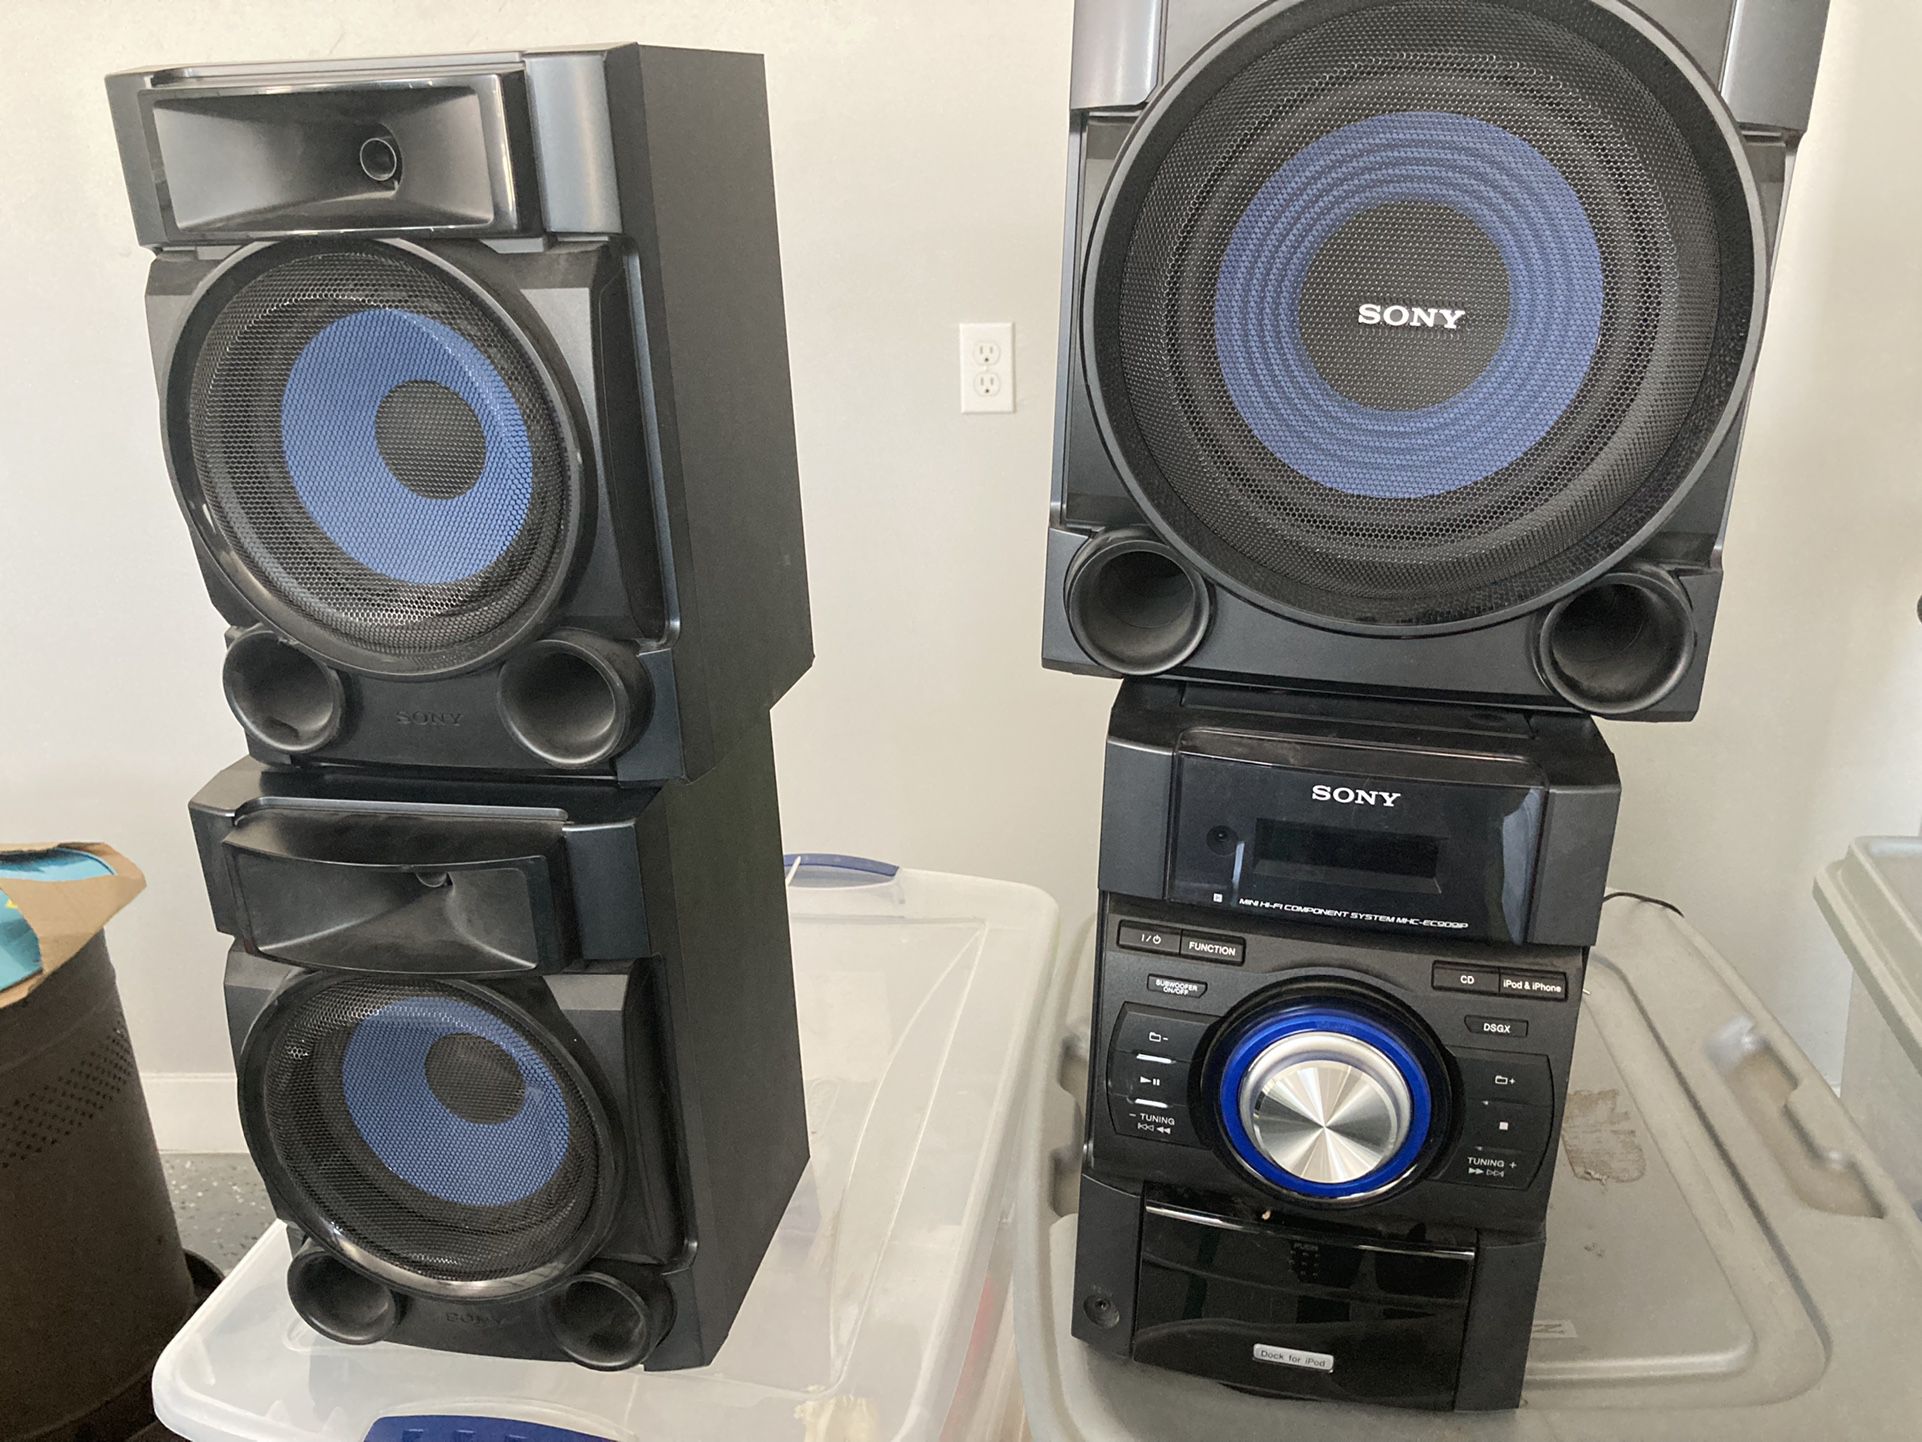 Sony Stereo Hi-Fi System MHC-EC909iP with 3 Speakers Subwoofer